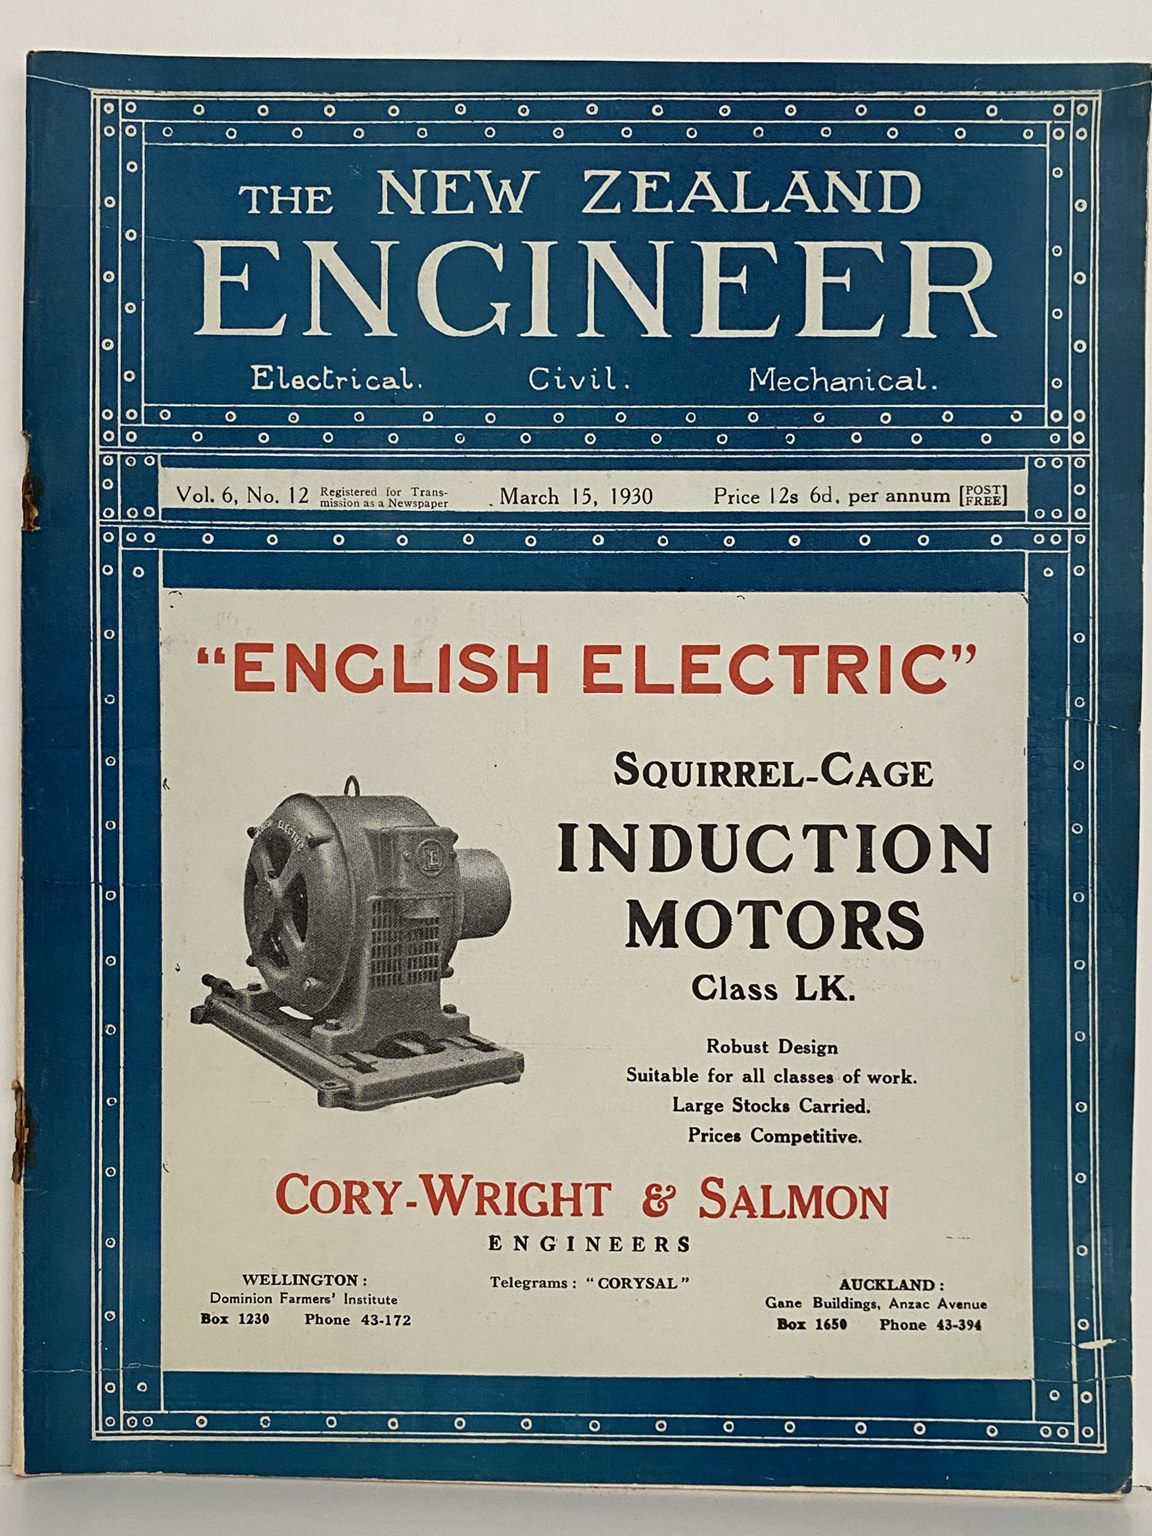 OLD MAGAZINE: The New Zealand Engineer Vol. 6, No. 12 - 15 March 1930